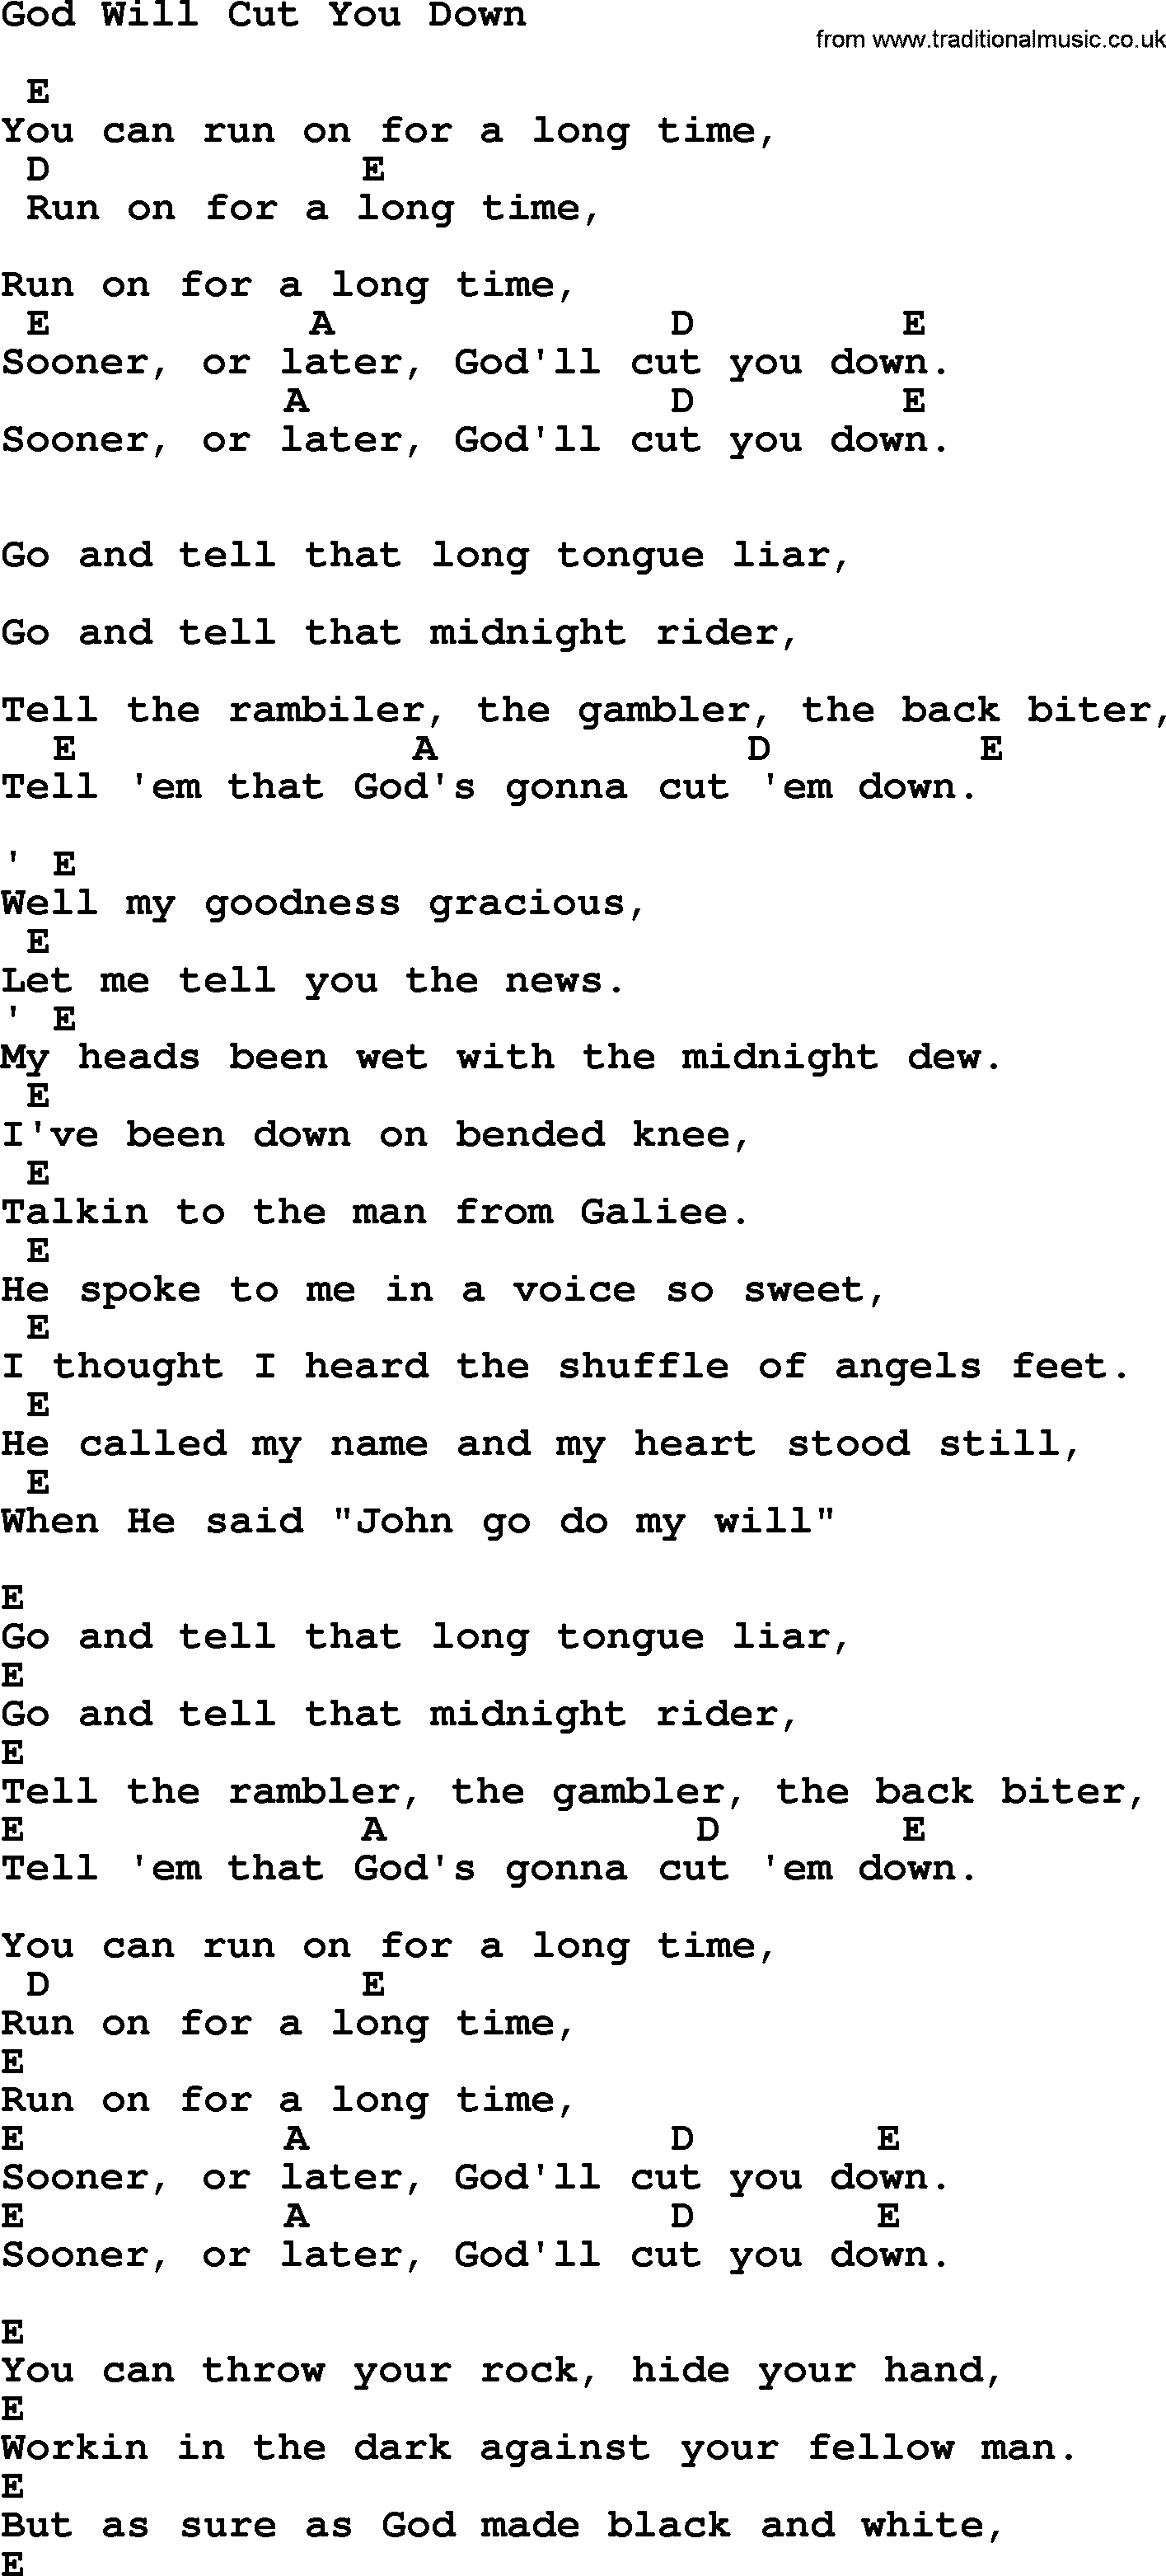 Johnny Cash song God Will Cut You Down, lyrics and chords